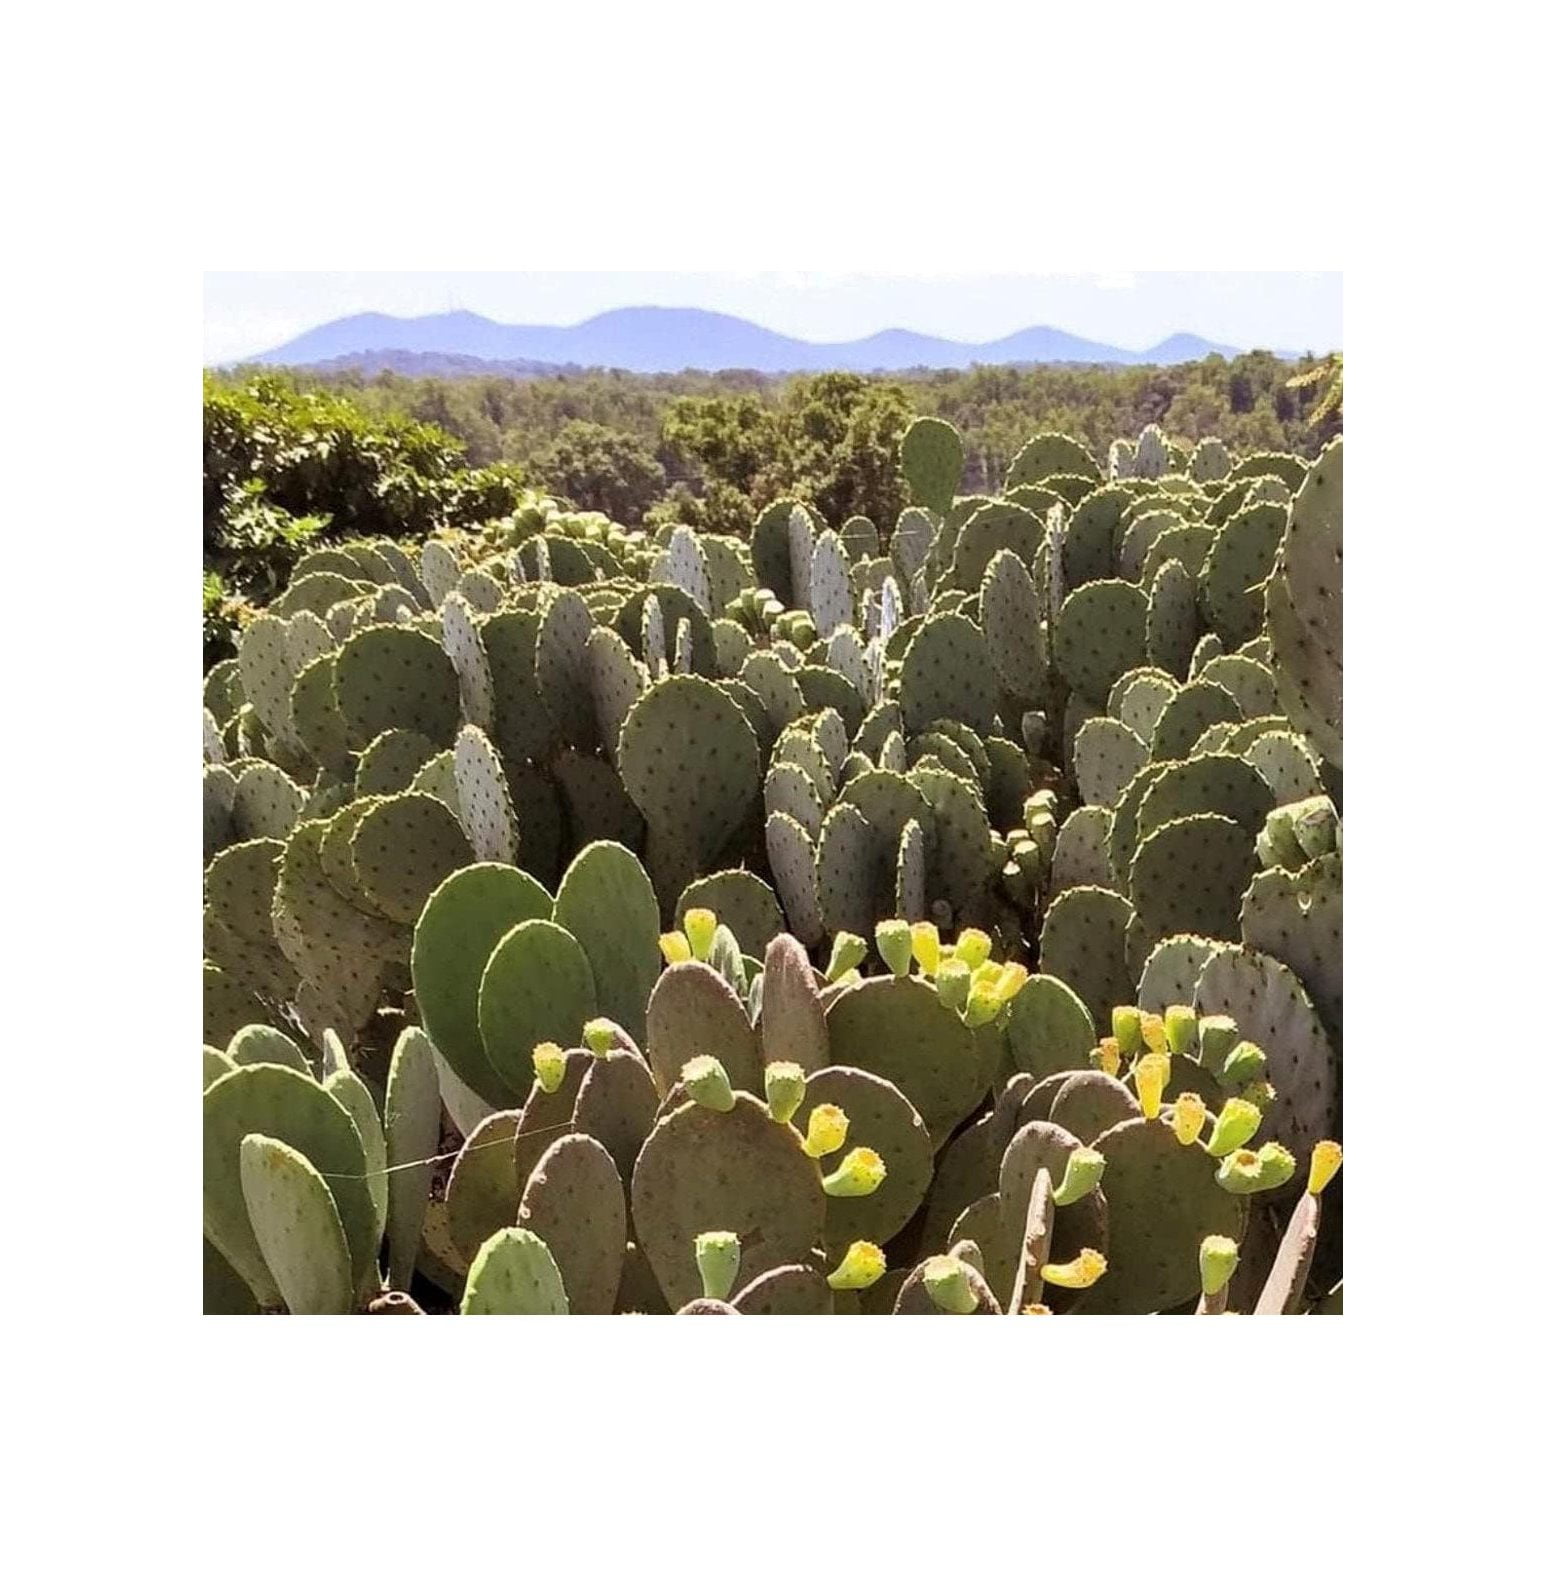 Creation Cultivated - Live Spineless Prickly Pear Cactus - Opuntia  cacanapa Ellisiana (1 PAD Cutting) / Winter Hardy Cactus - USDA Zone 6 /  Unrooted Freshly Cut Cactus Pads / Tortoise Food 